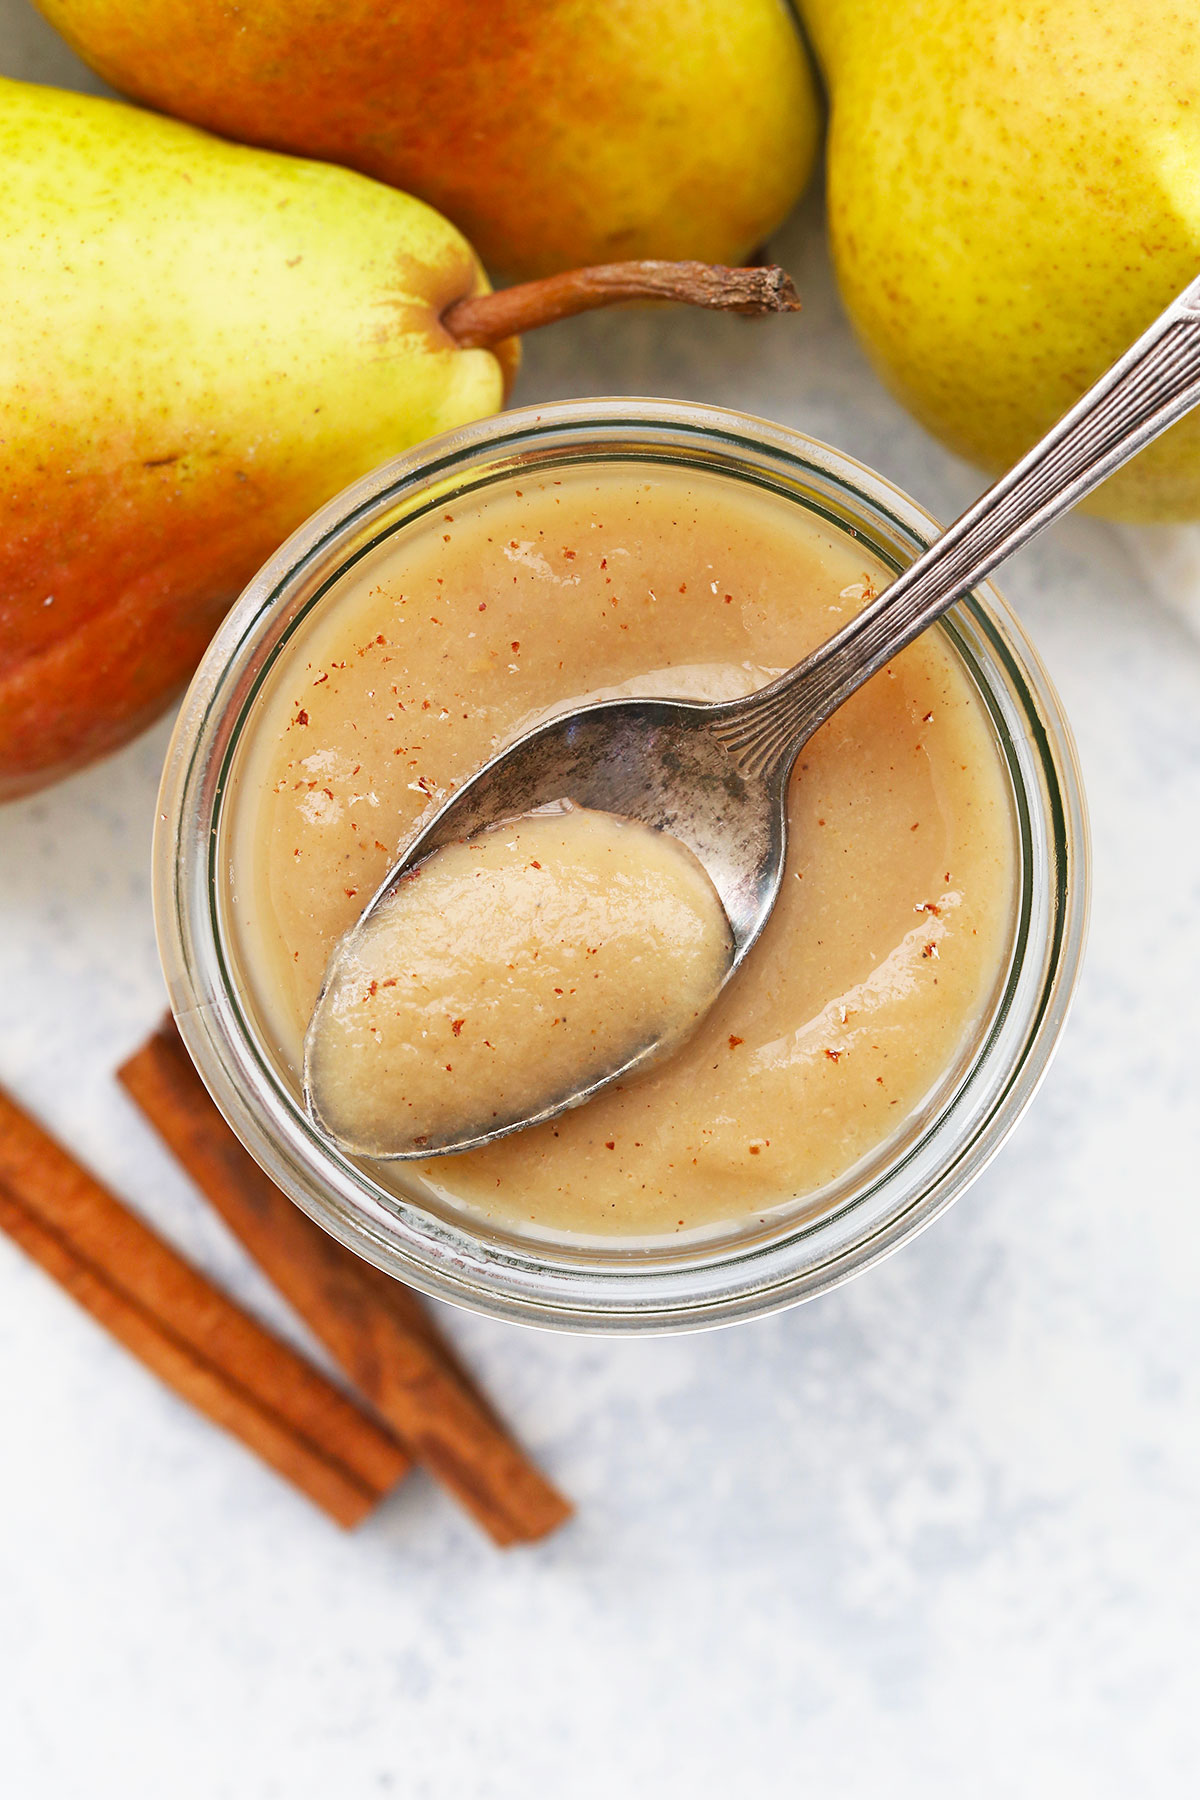 spoon dipped in a jar of pear sauce